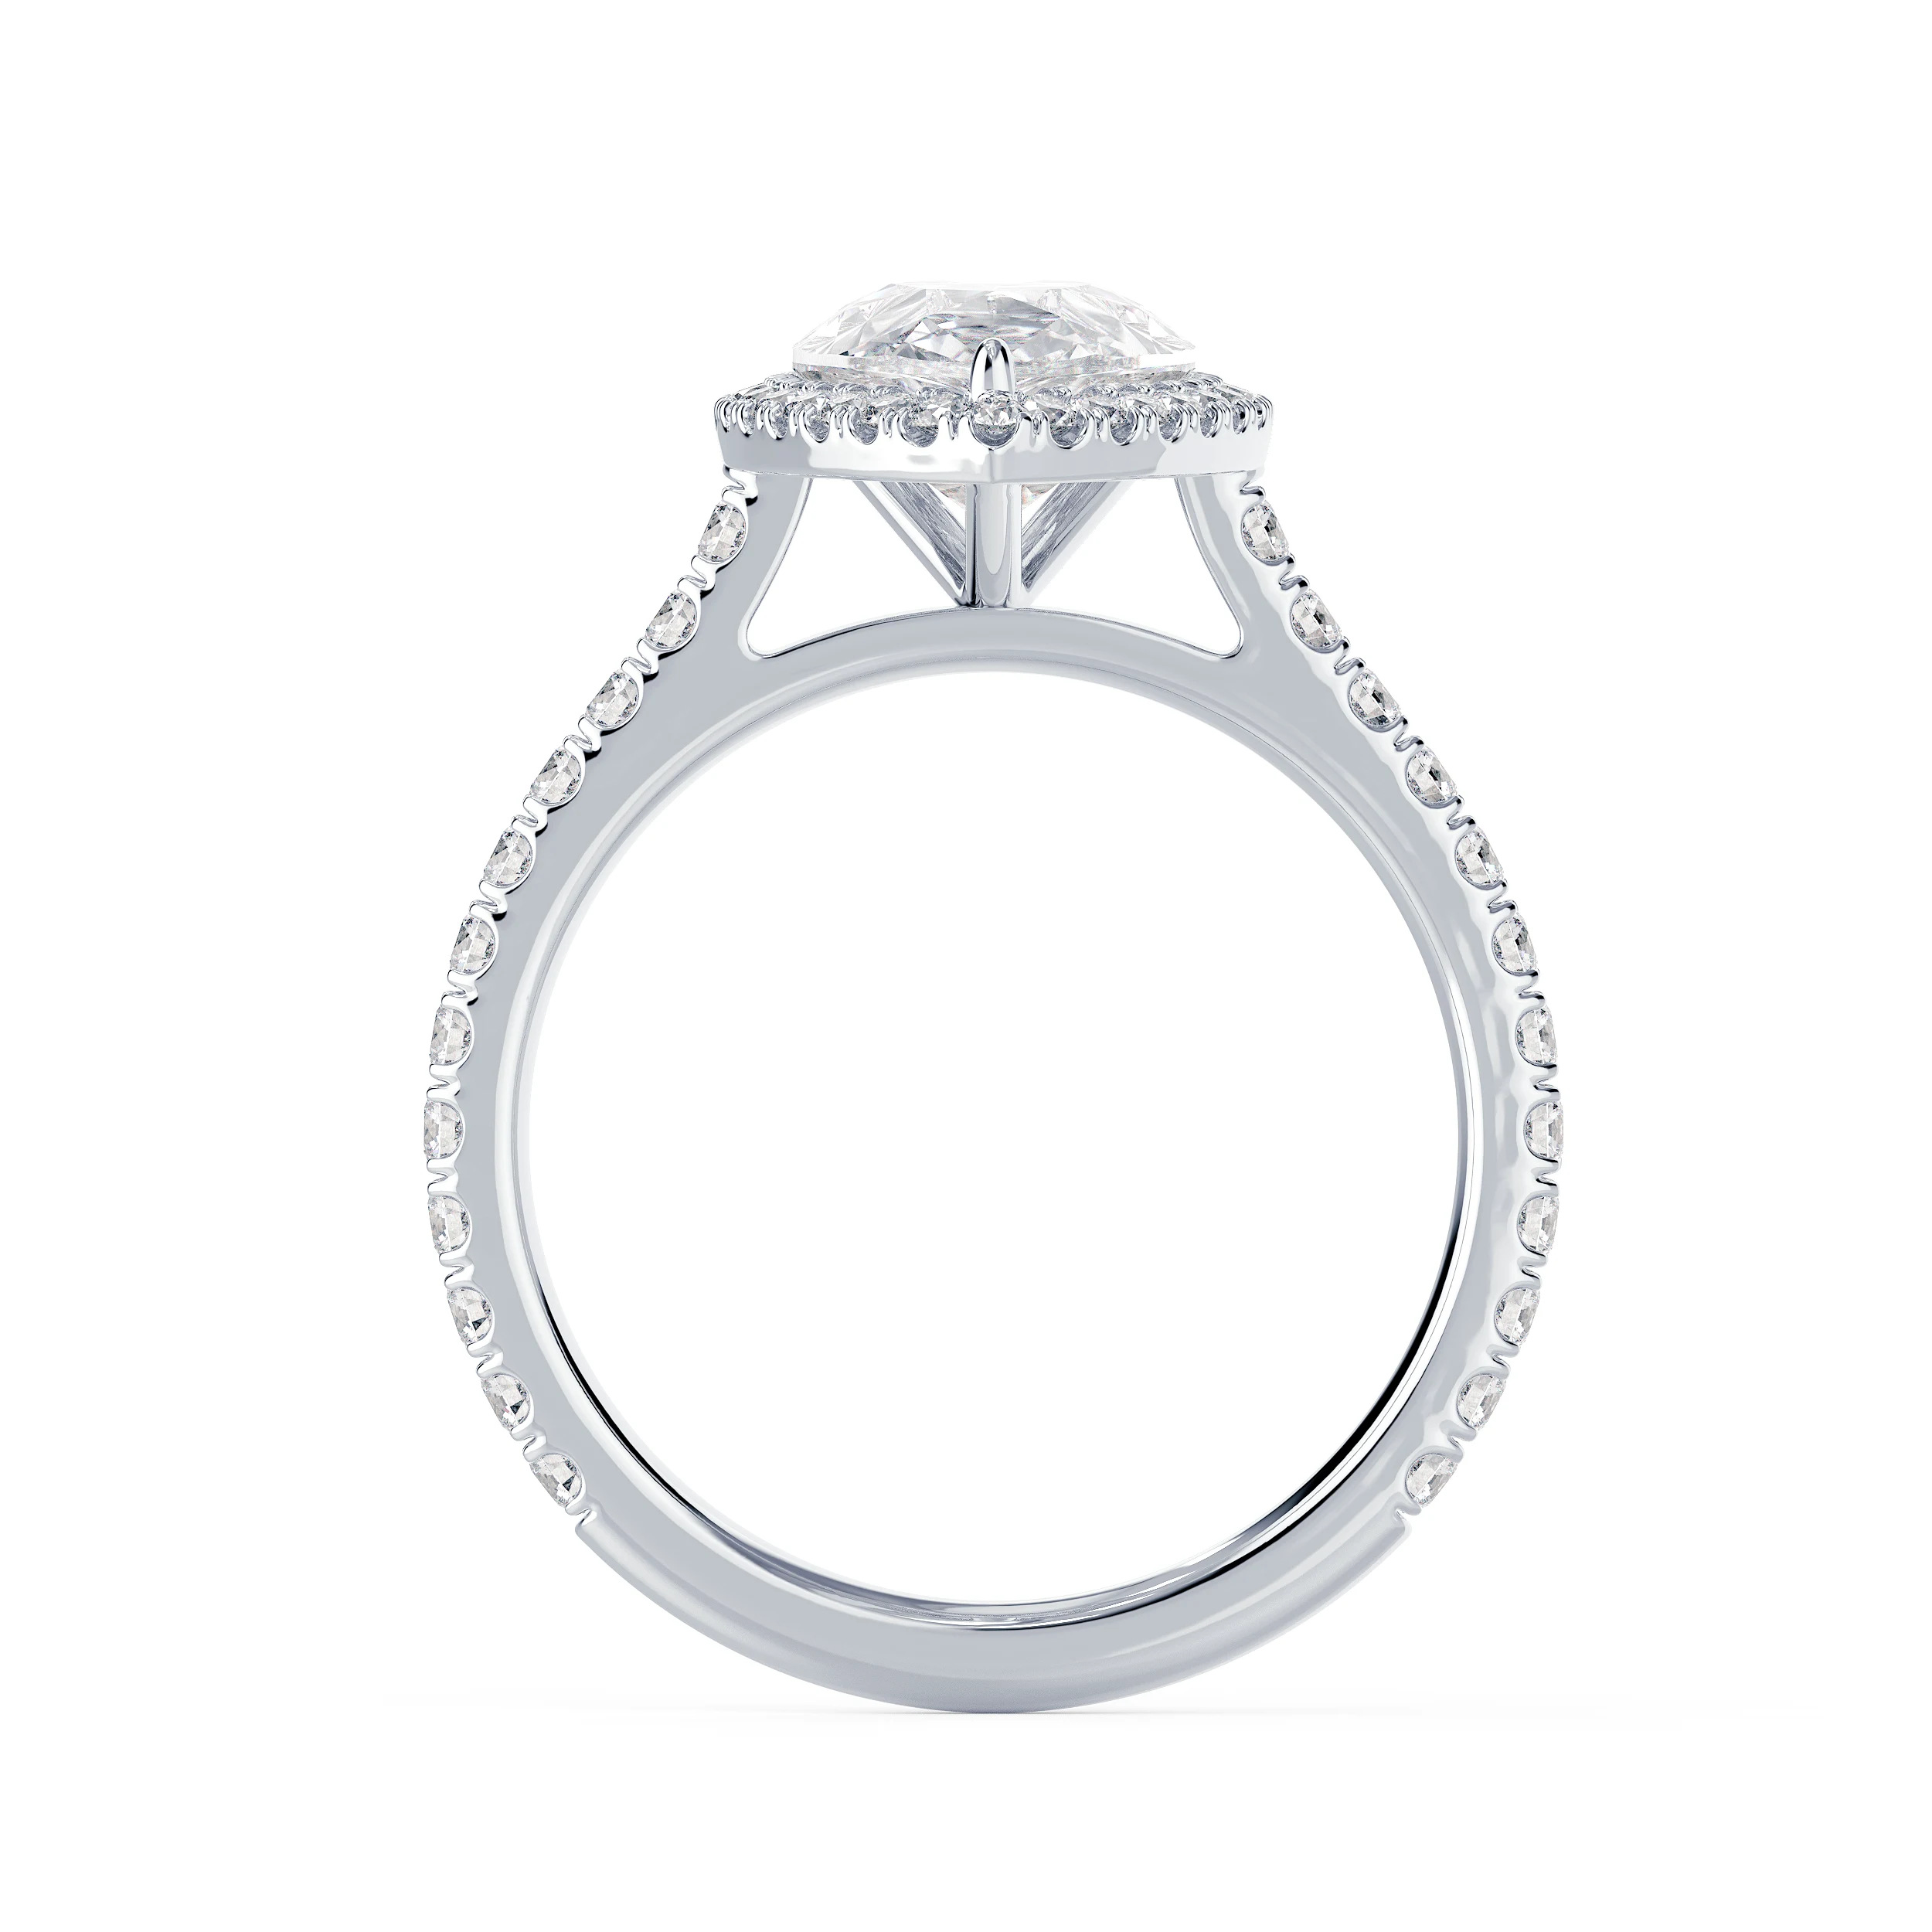 Hand Selected Diamonds set in White Gold Pear Halo Pavé Setting (Profile View)